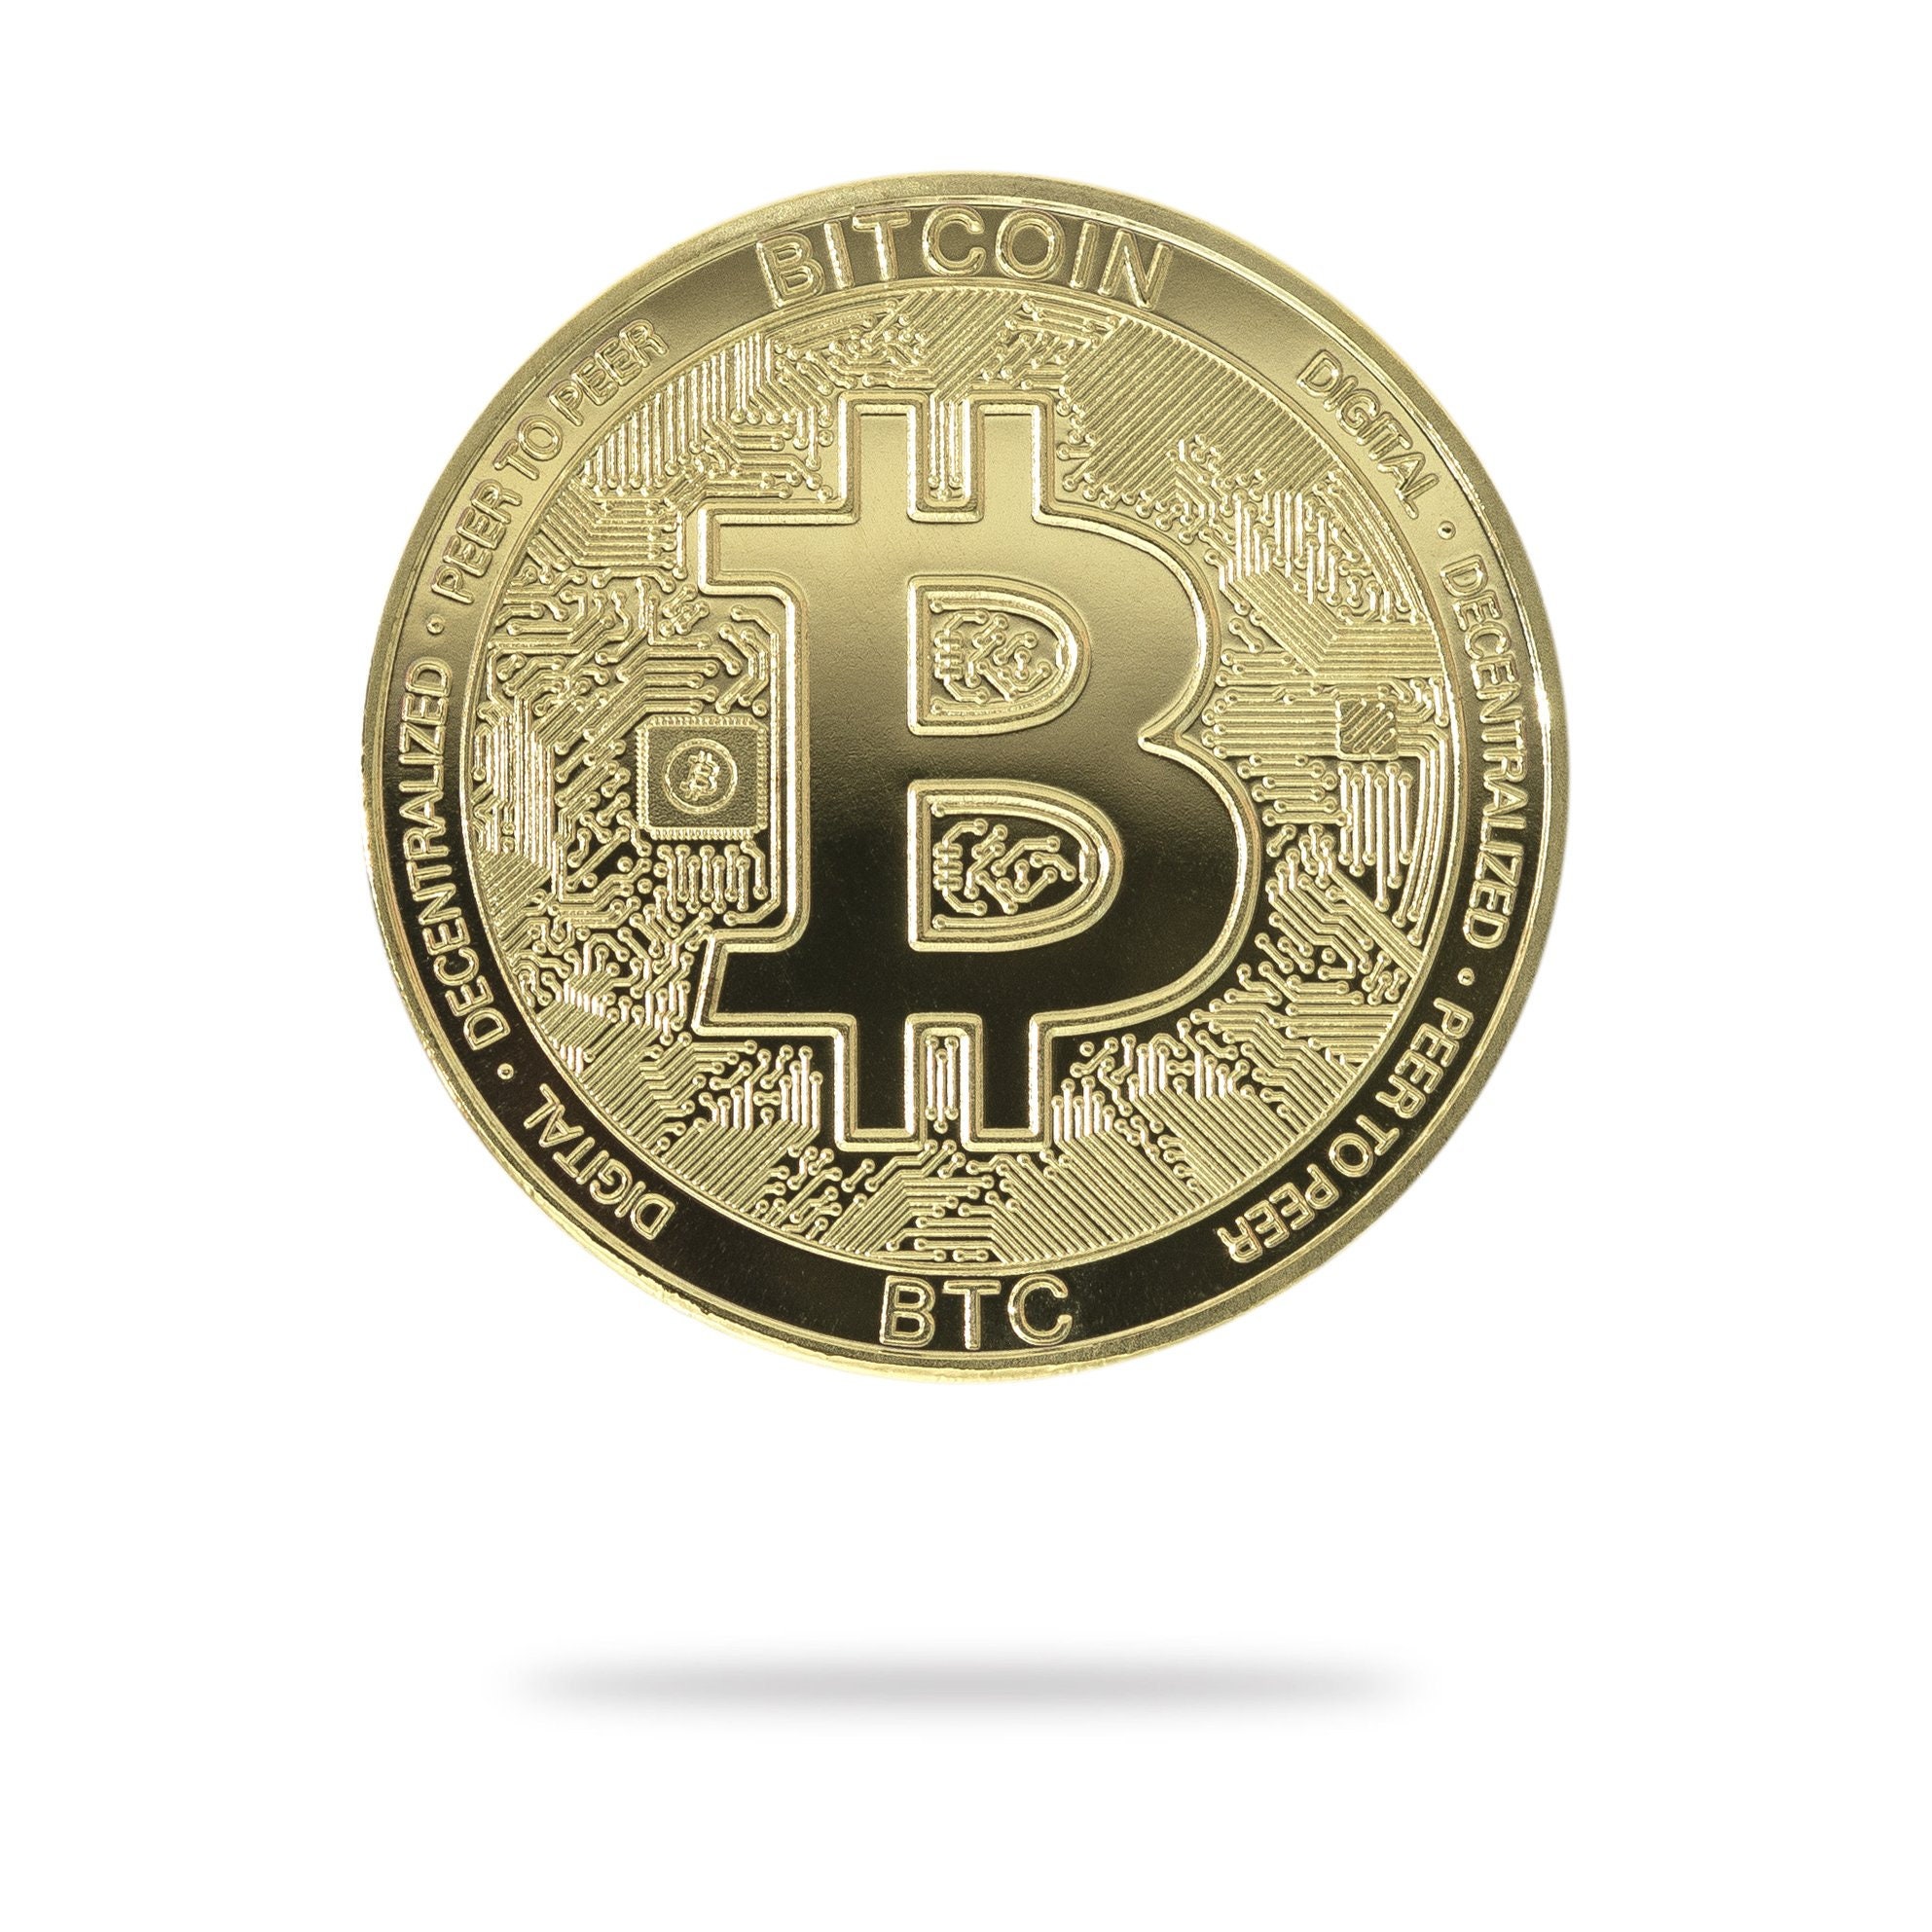 Beautifully Designed Physical Bitcoin Model 